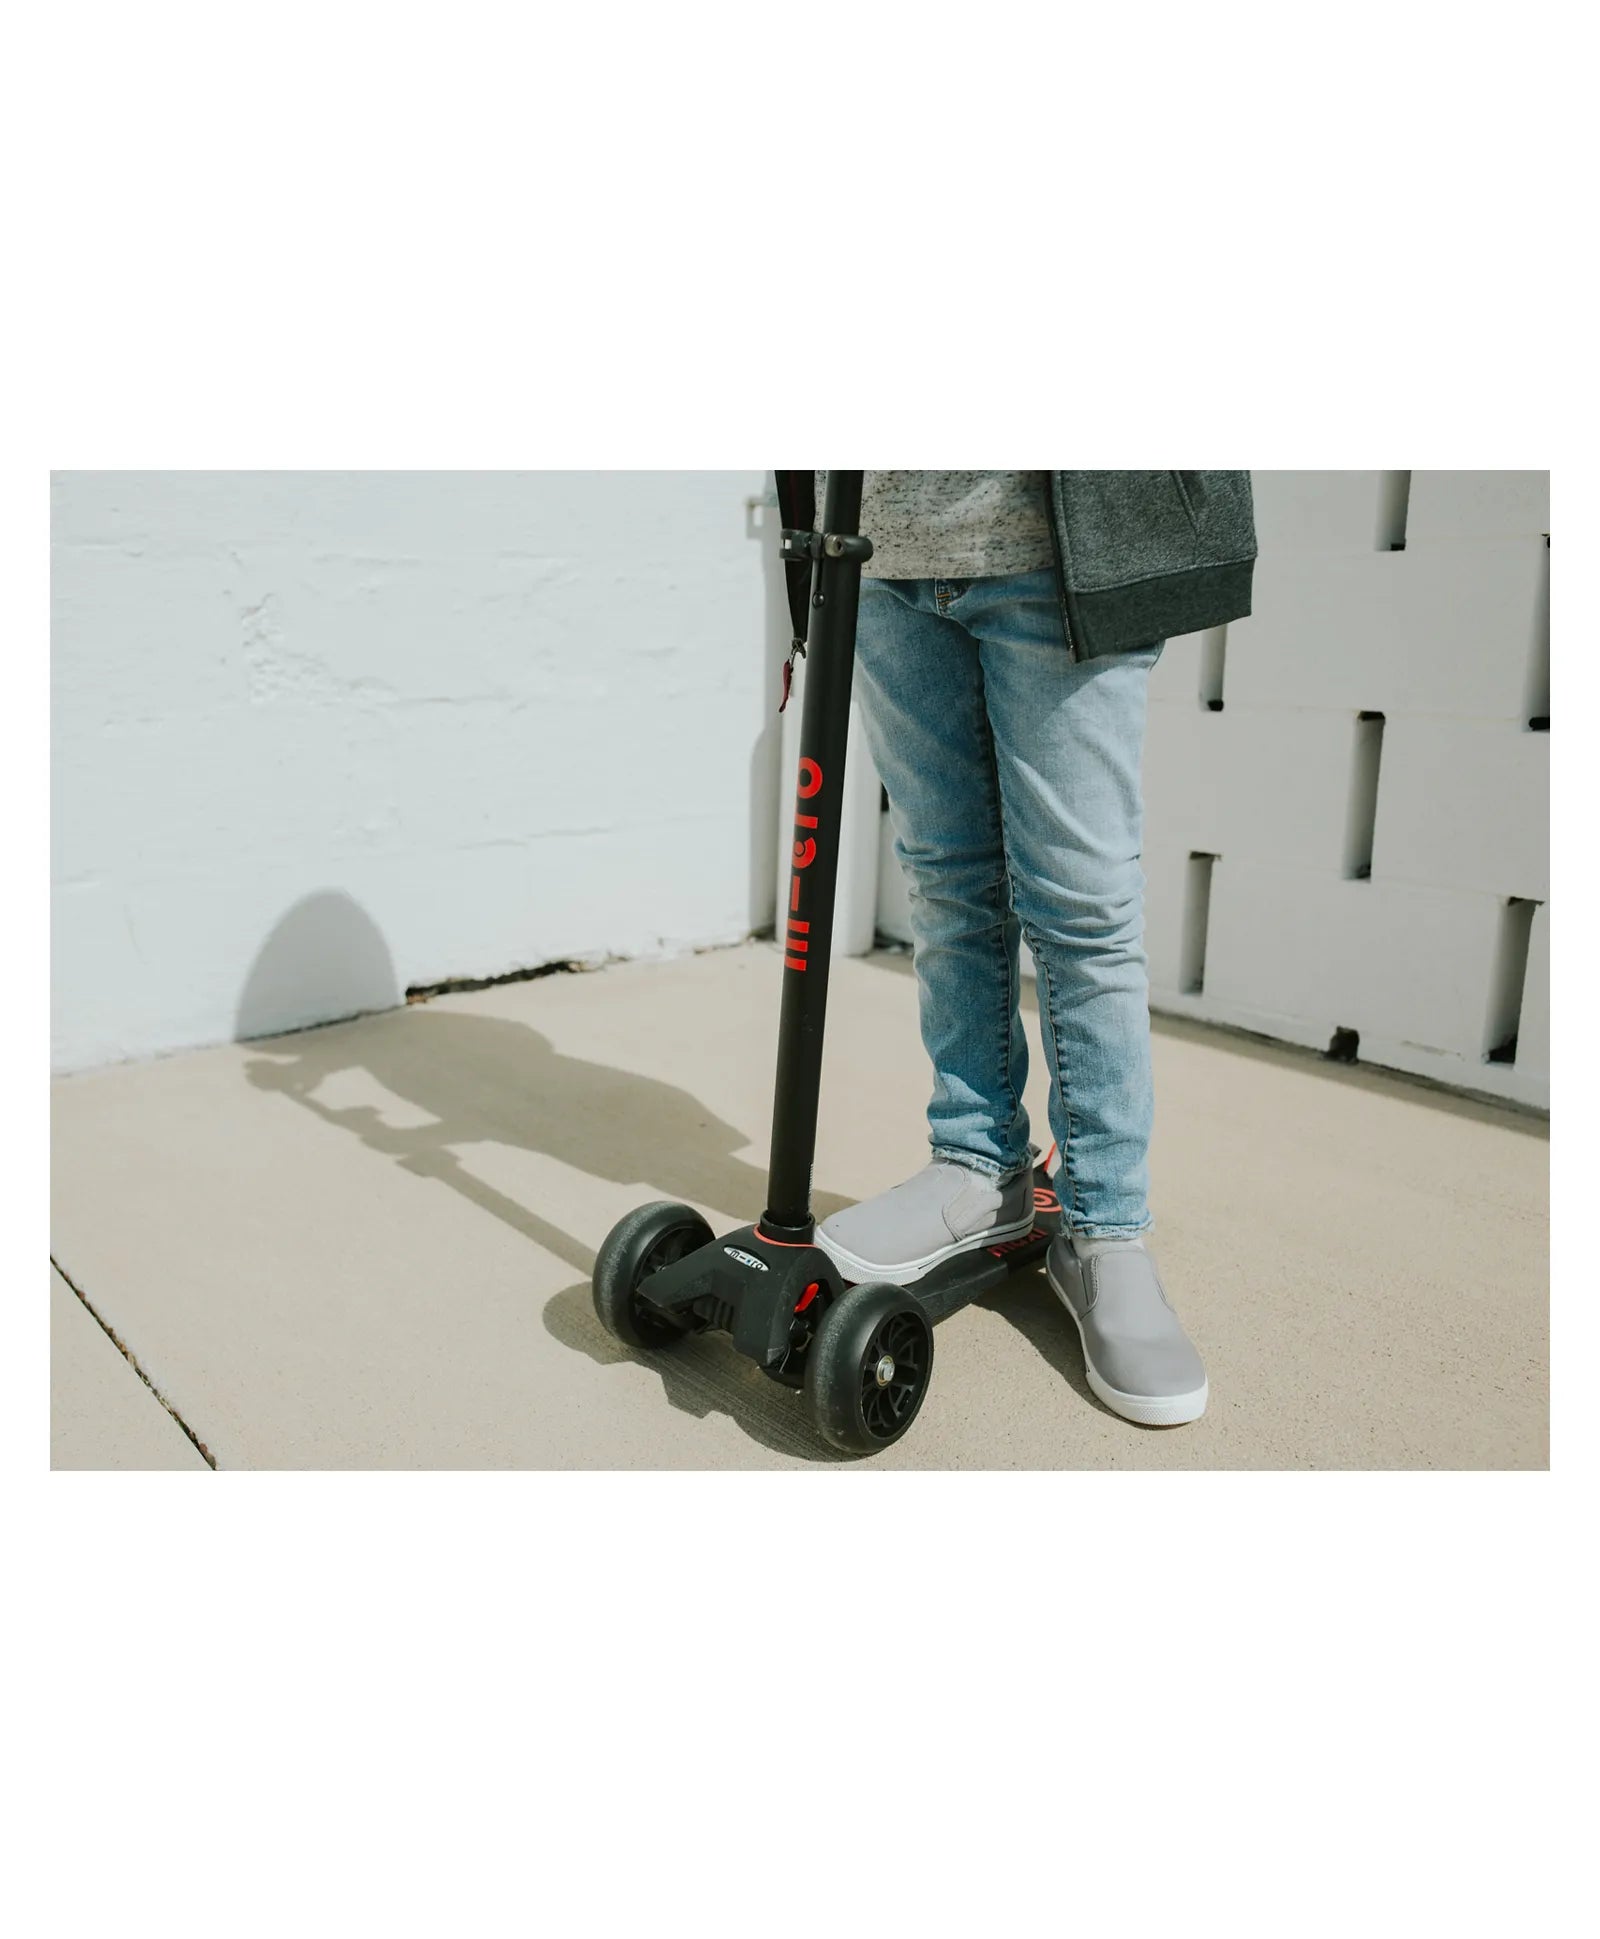 Micro Maxi Deluxe Pro Scooter - Black and Red - Laadlee